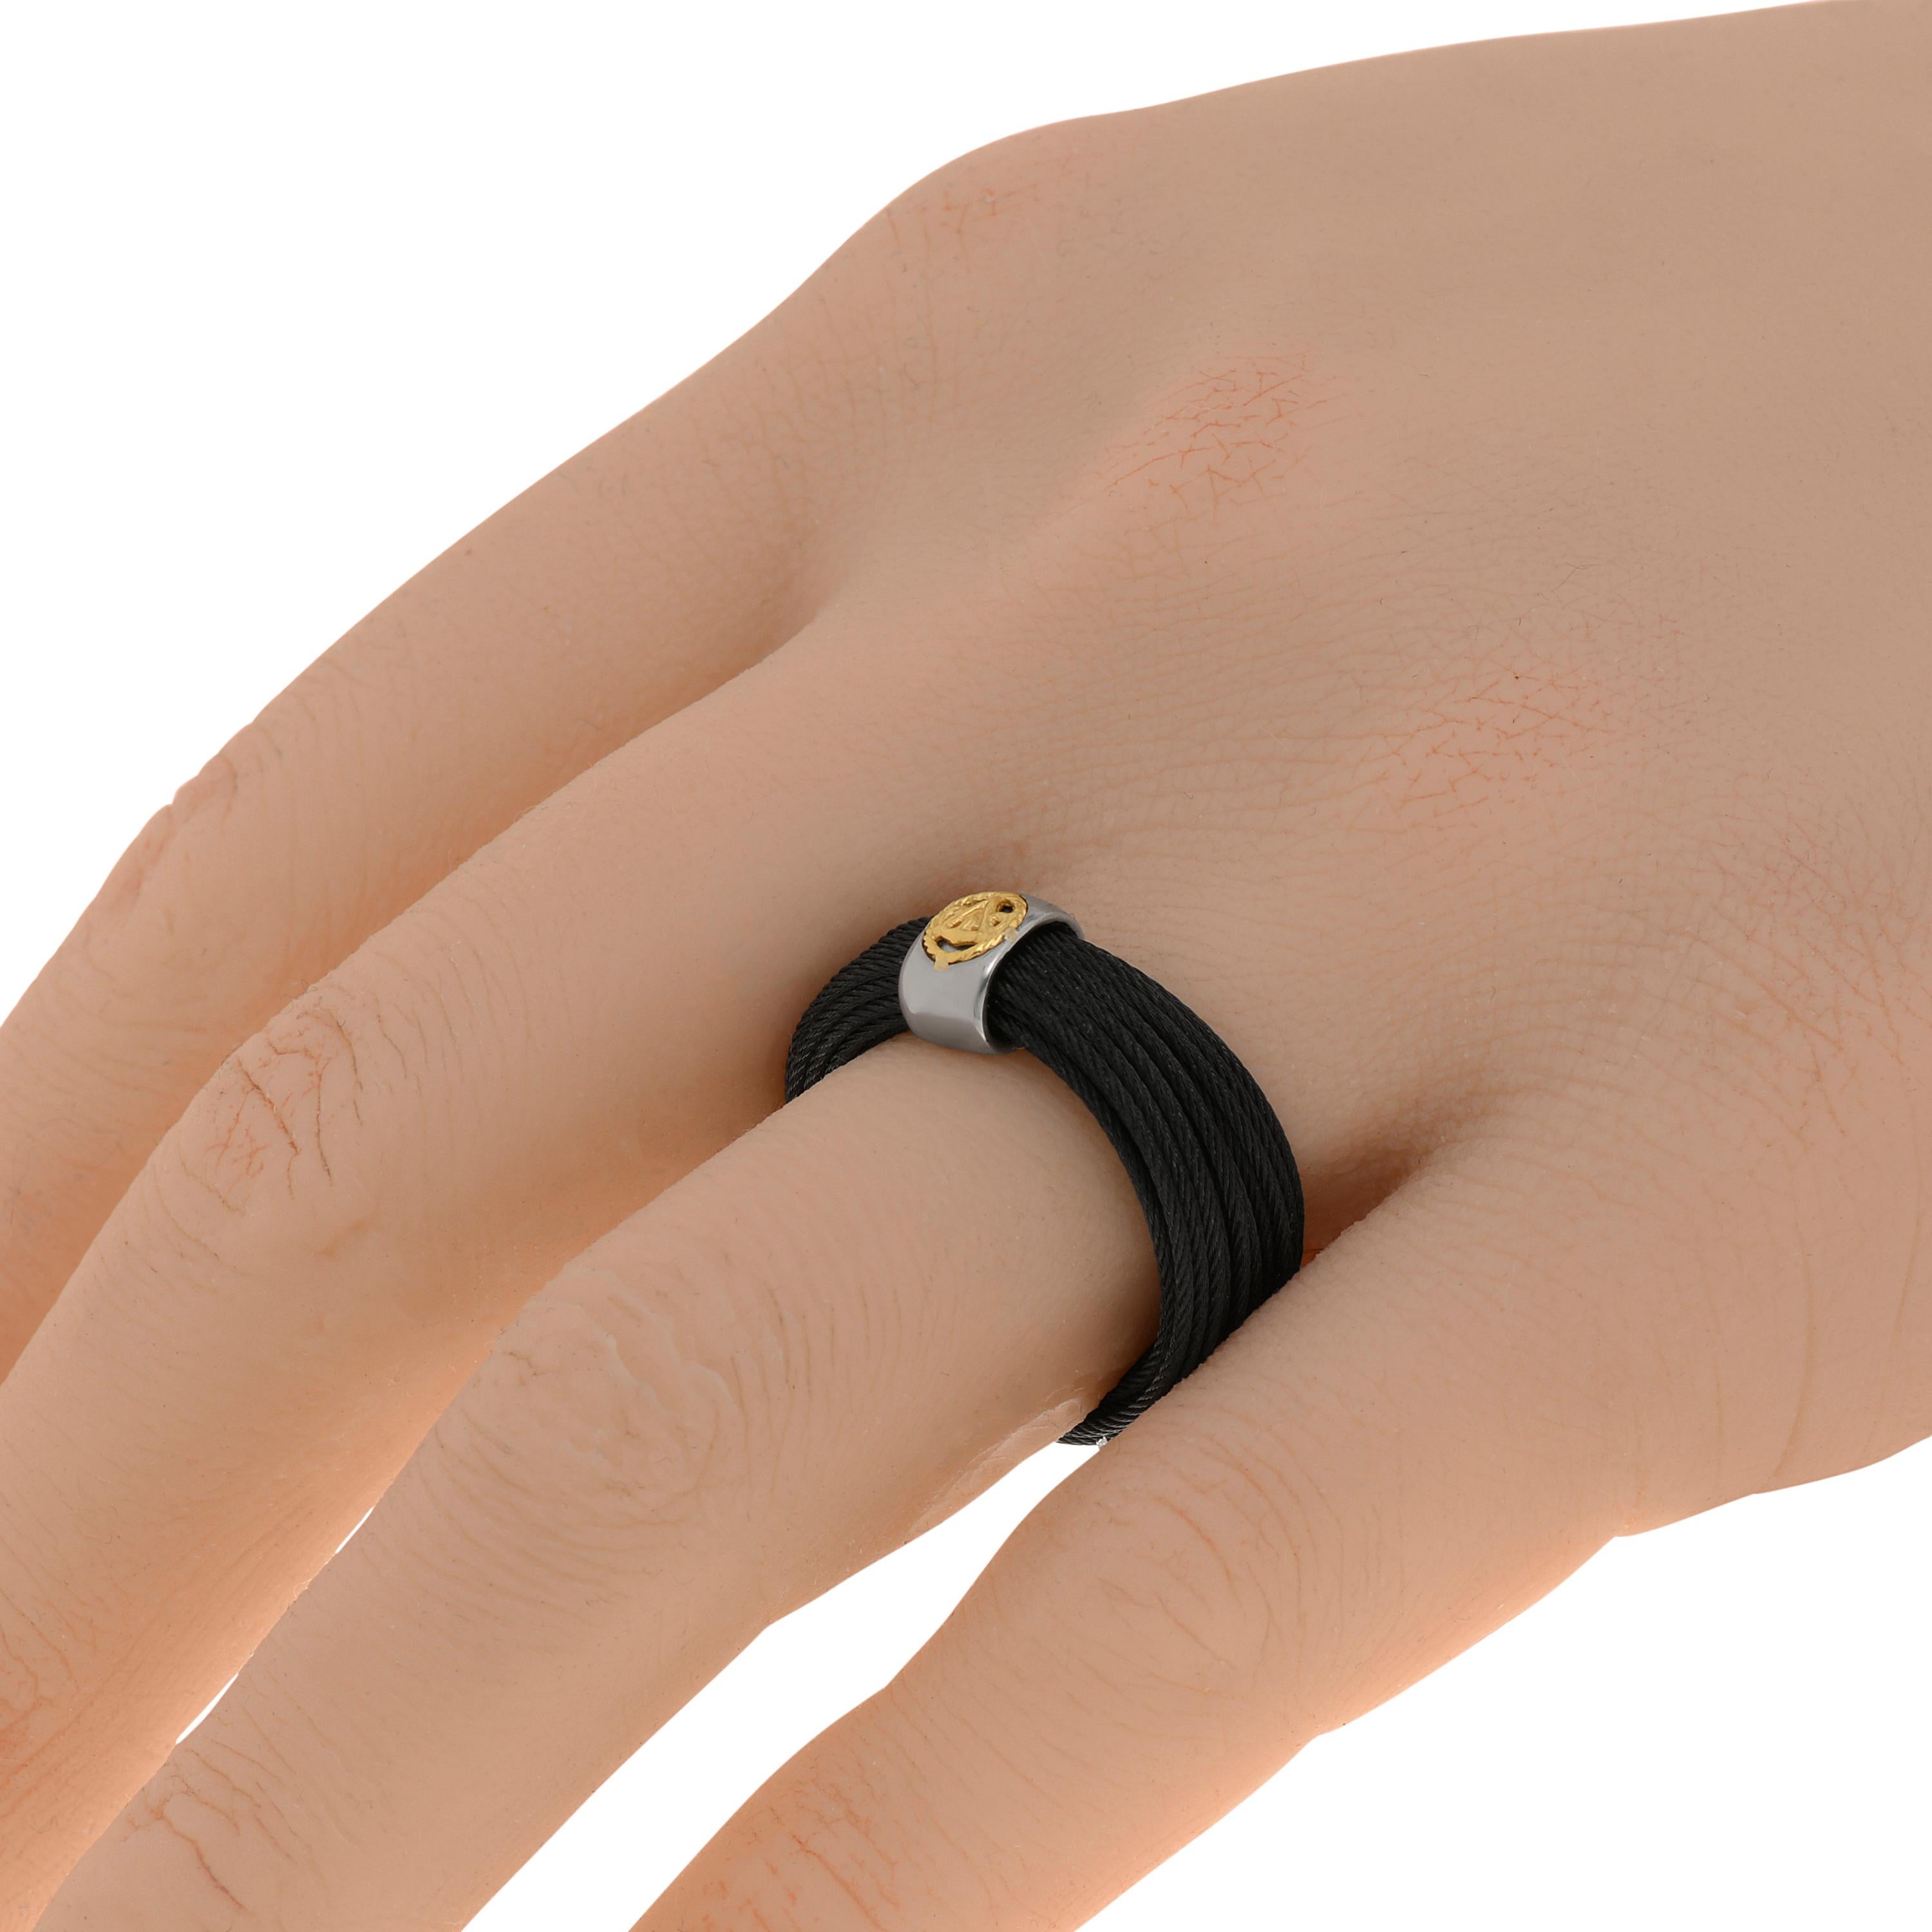 Alor stainless steel and 18K yellow gold cable band ring features layered black micro cables. The ring size is 7 (54.4). The band width is 7.7mm. The weight is 6.7g.
